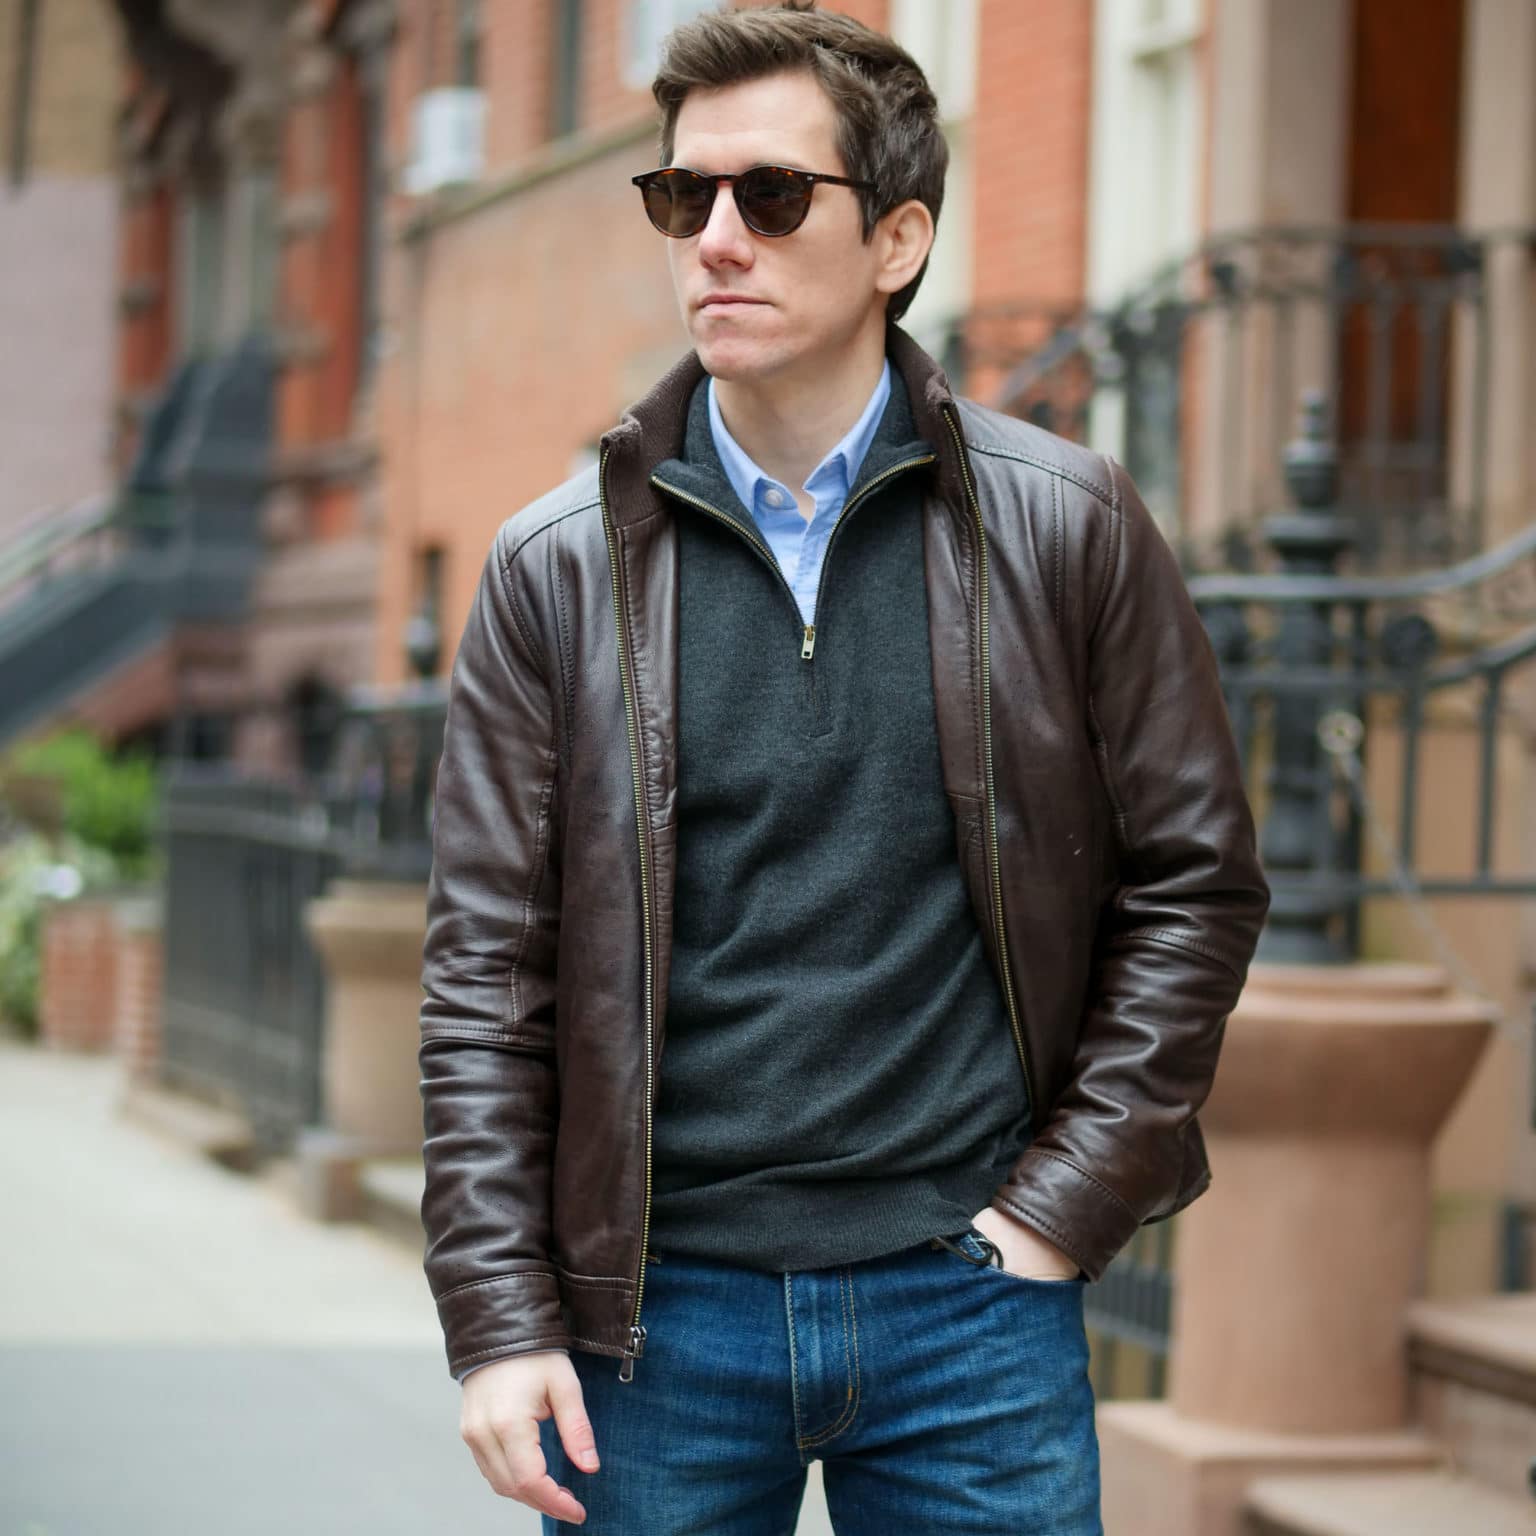 Outerwear for Short Men: The Ultimate Guide [2022] - The Modest Man